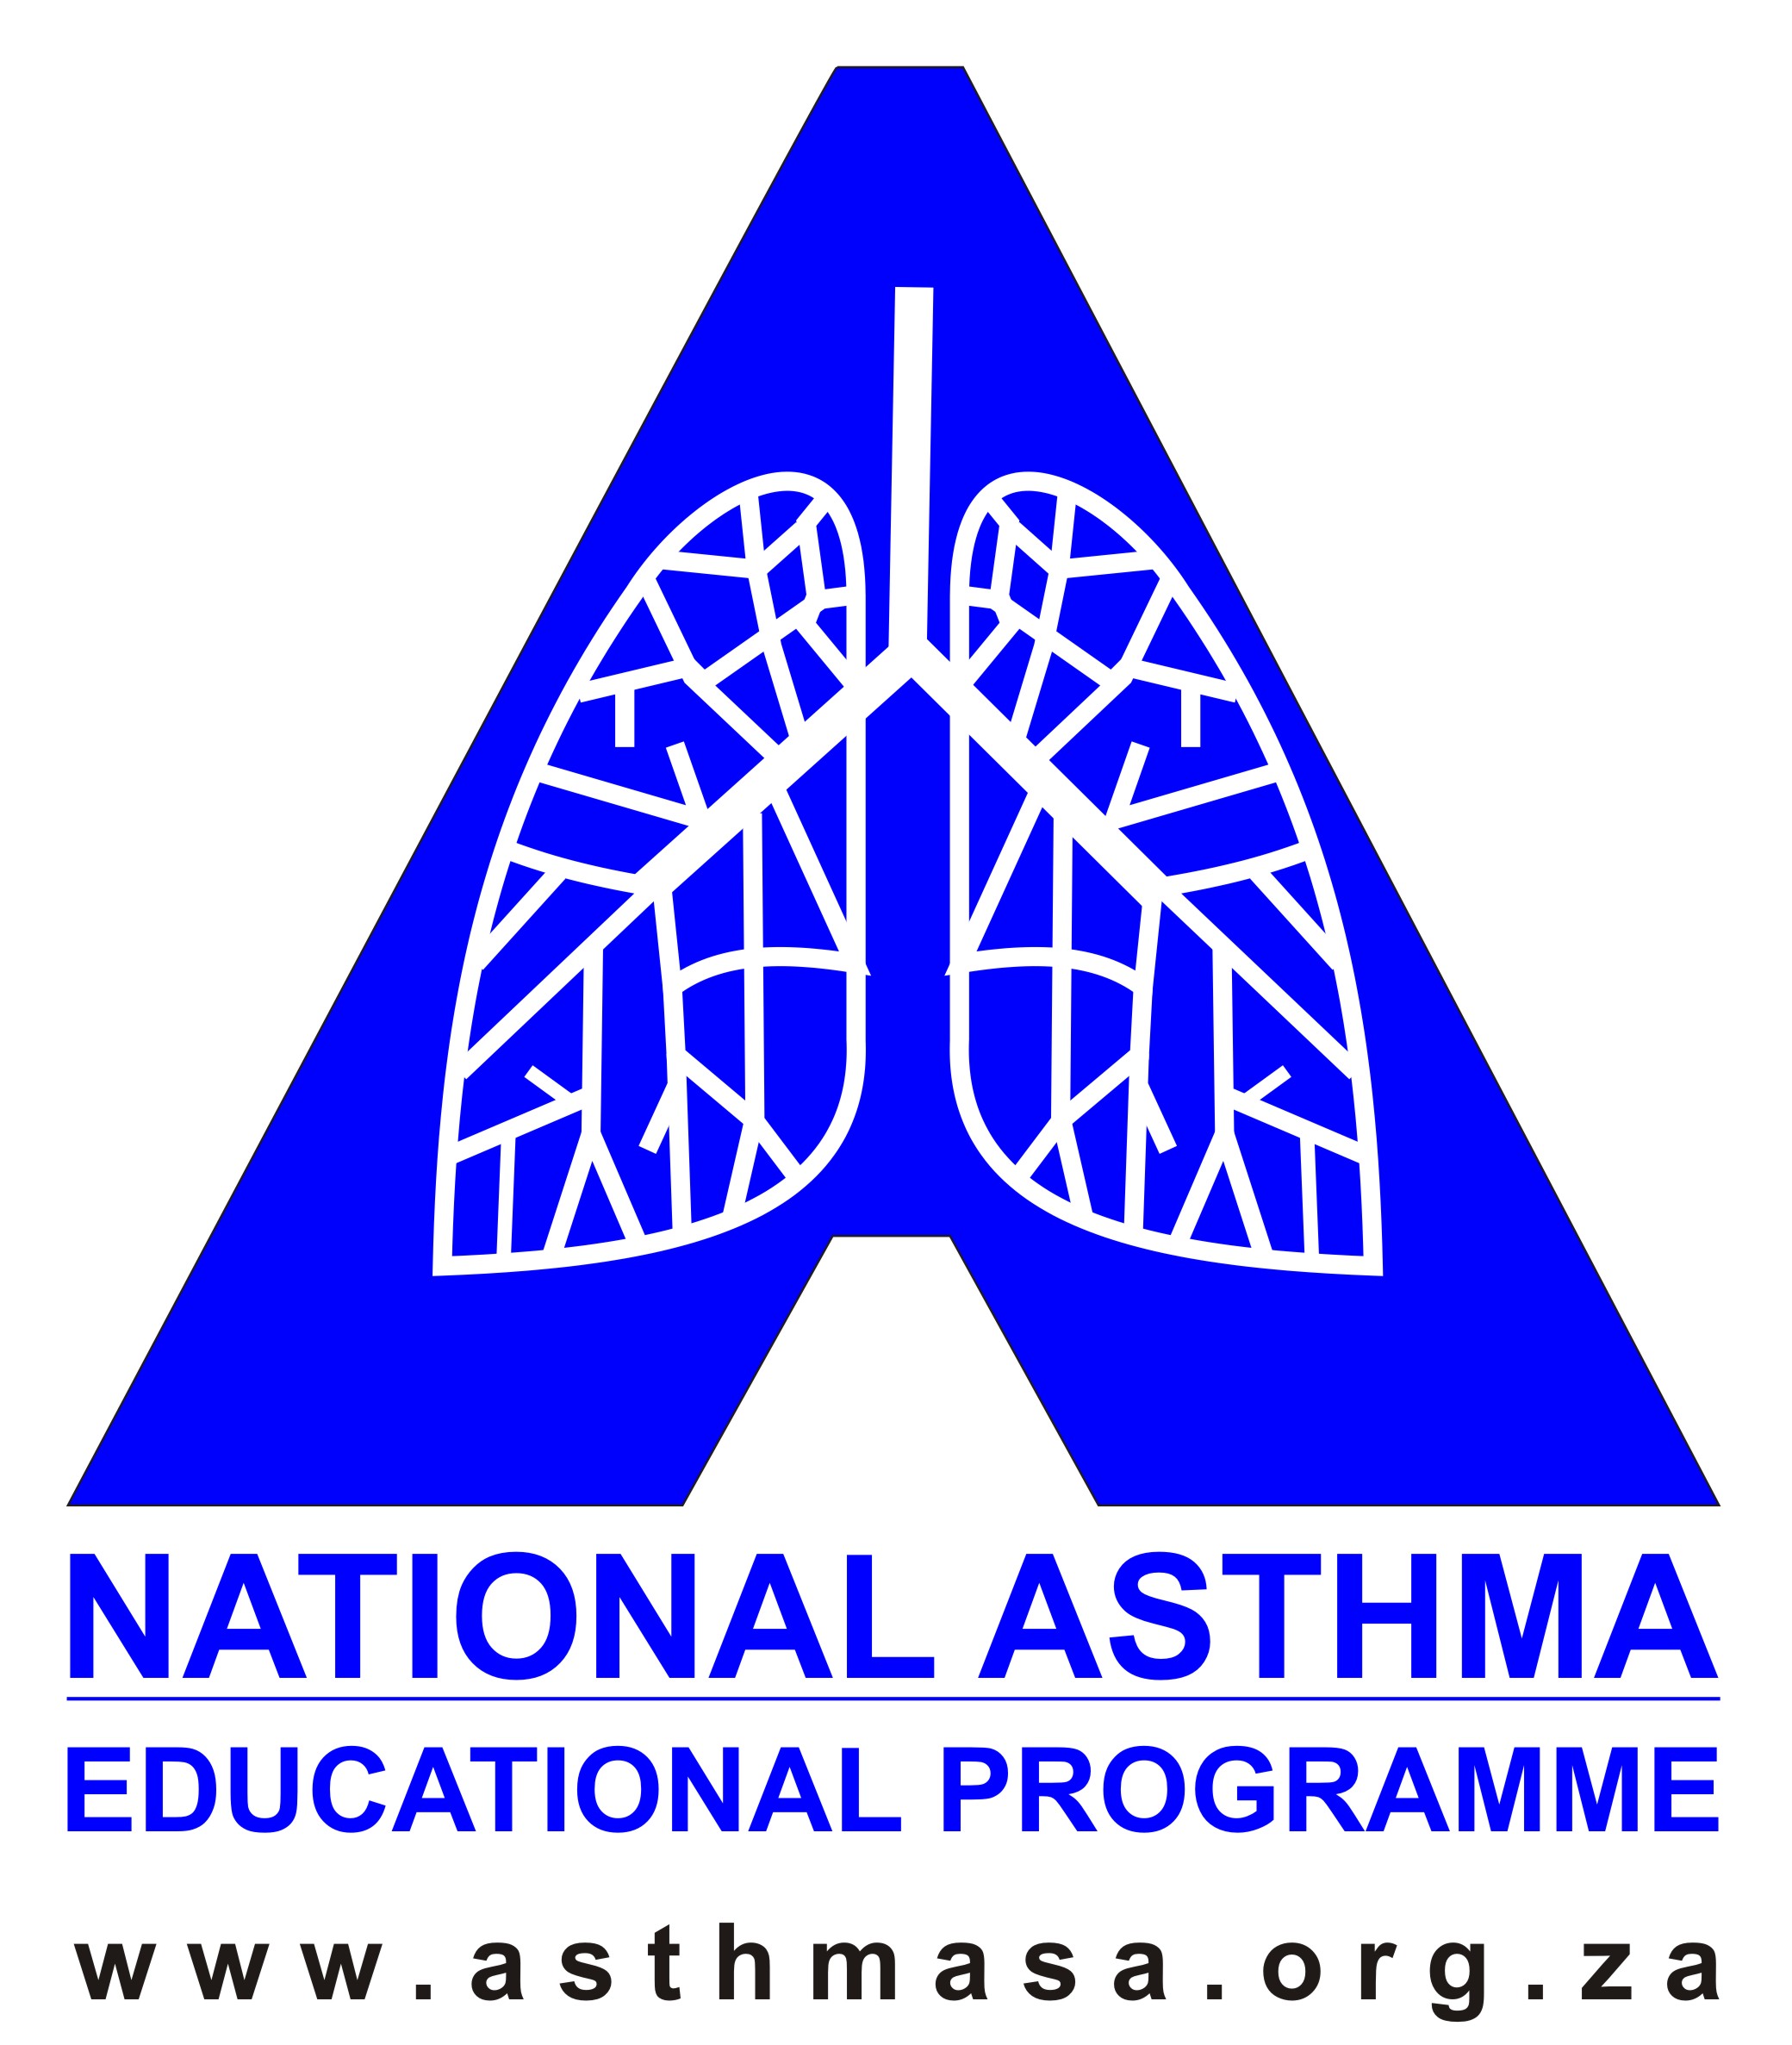 More about National Asthma Education Programme